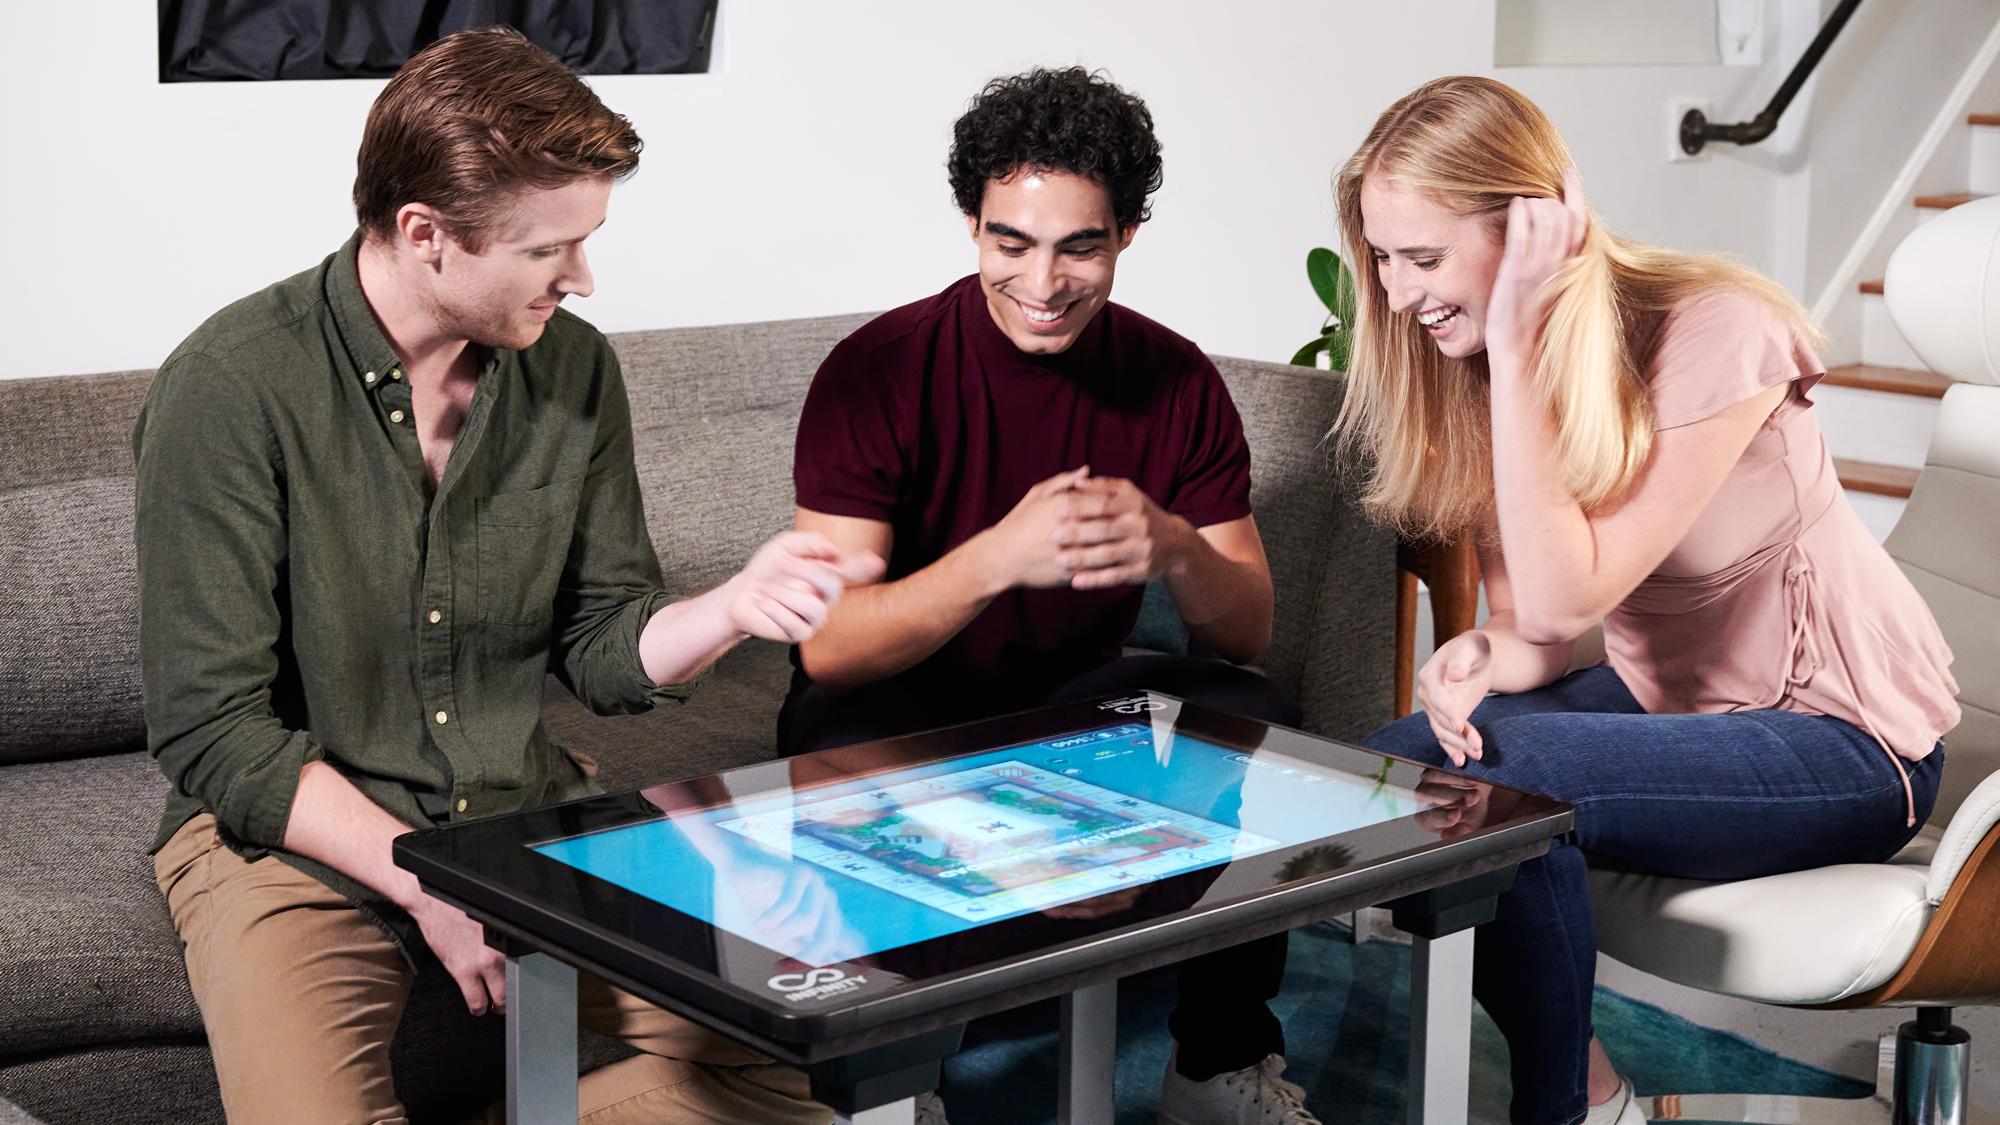 Up to six players can crowd around the Infinity Game Table at once, but online multiplayer means they don't necessarily all have to be under the same roof. (Image: Arcade1Up)